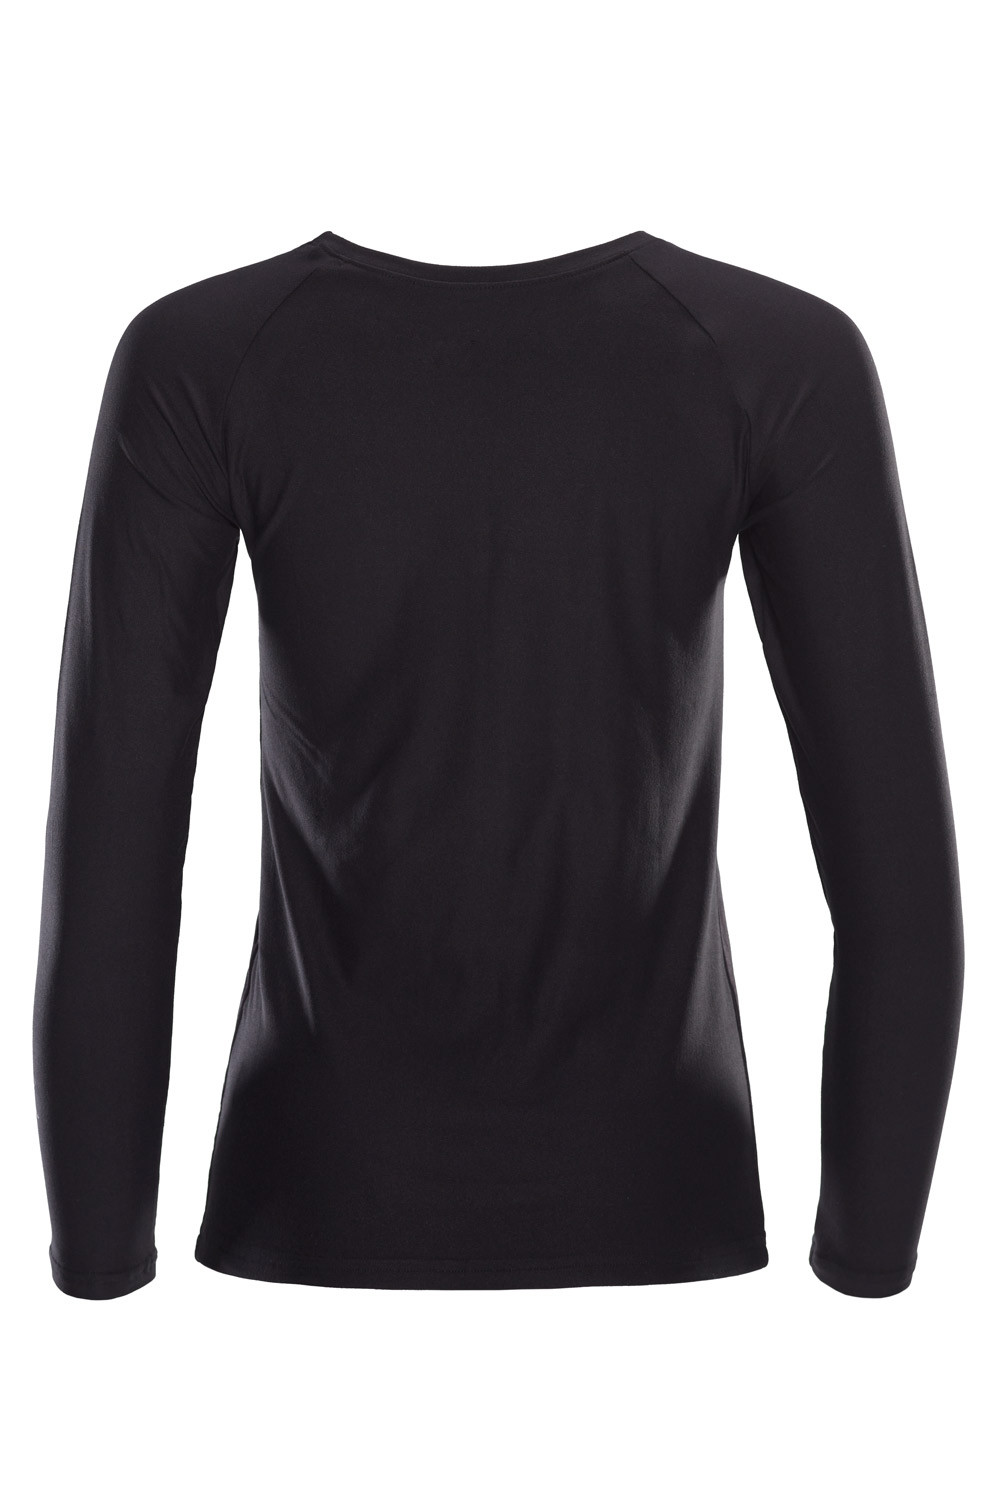 Style Light and Panther, Winshape AET120LS, Top Soft Sleeve Ultra Functional Soft Long